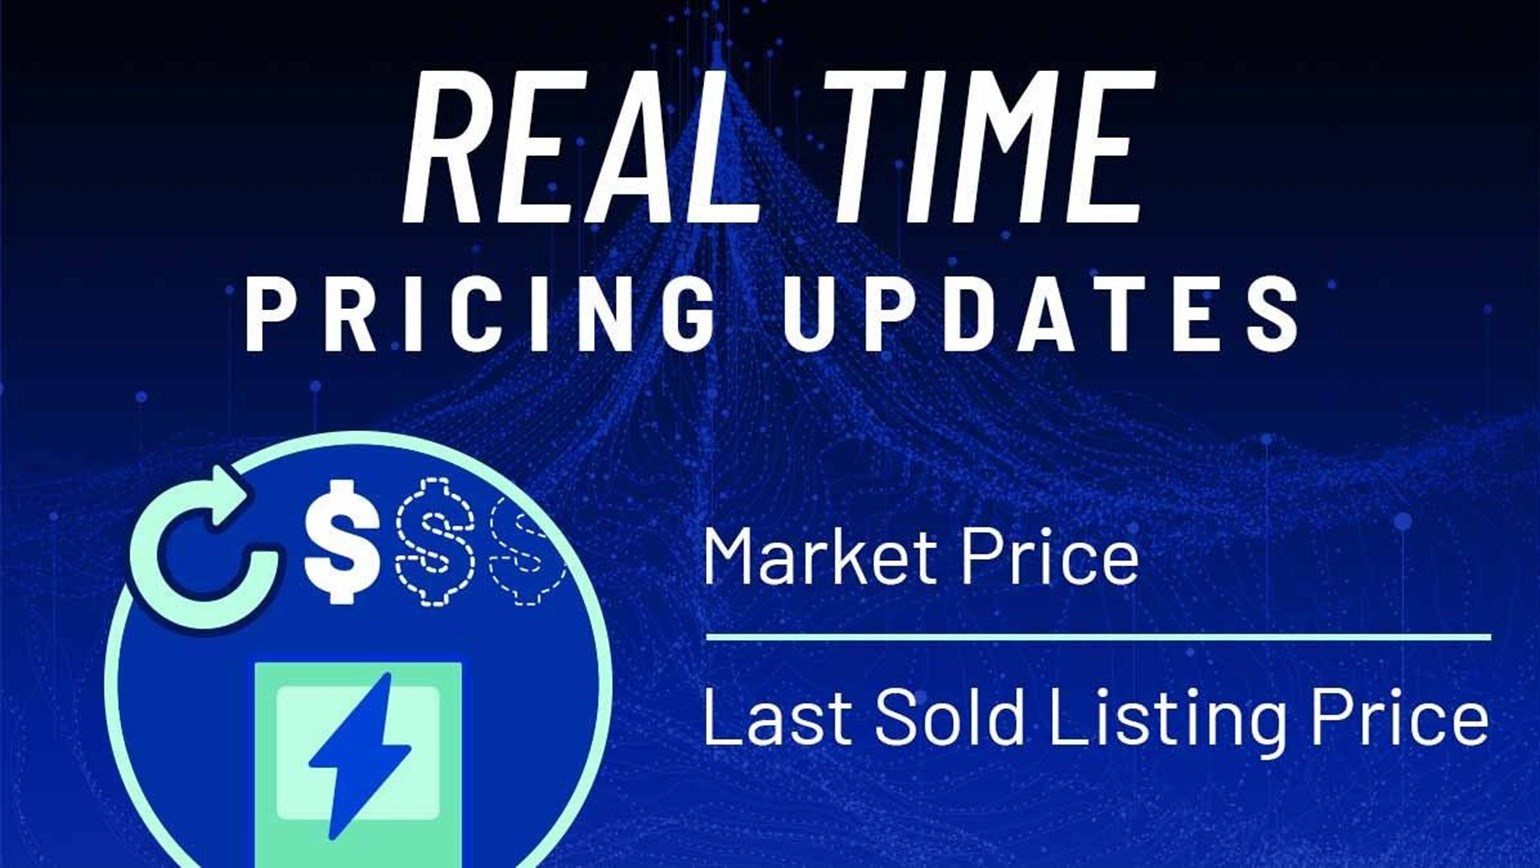 Streaming of Market Price & Last Sold Listing